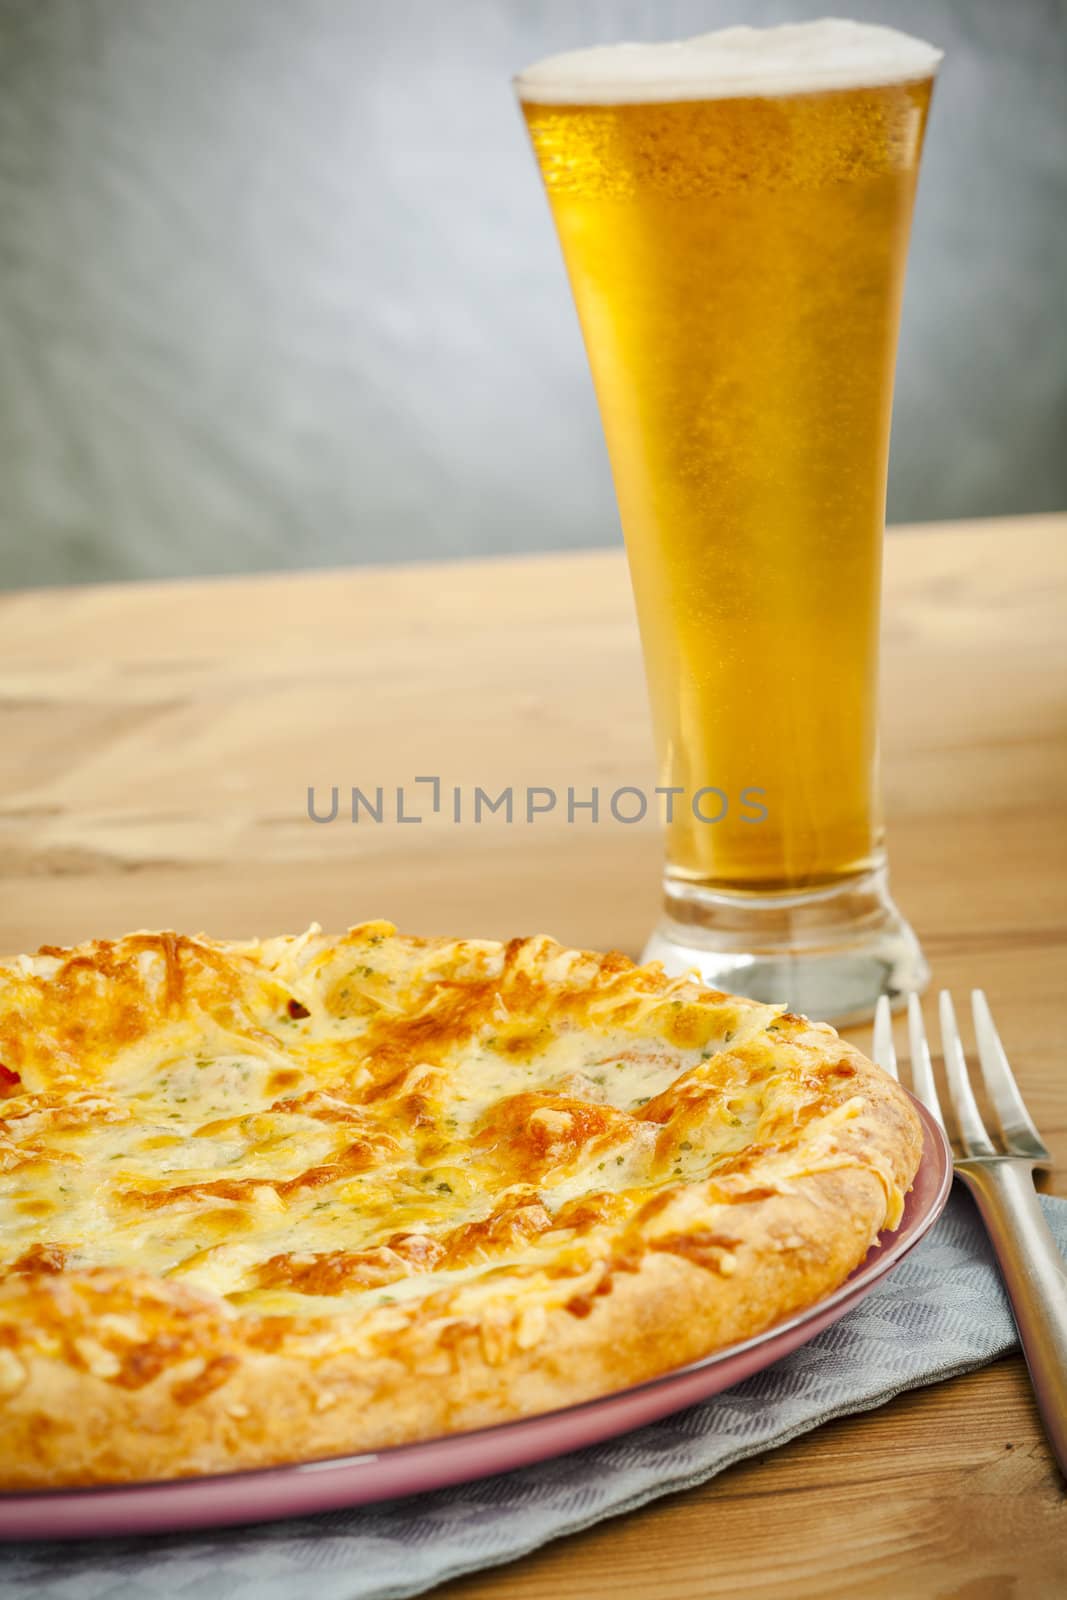 Pizza and beer by mjp